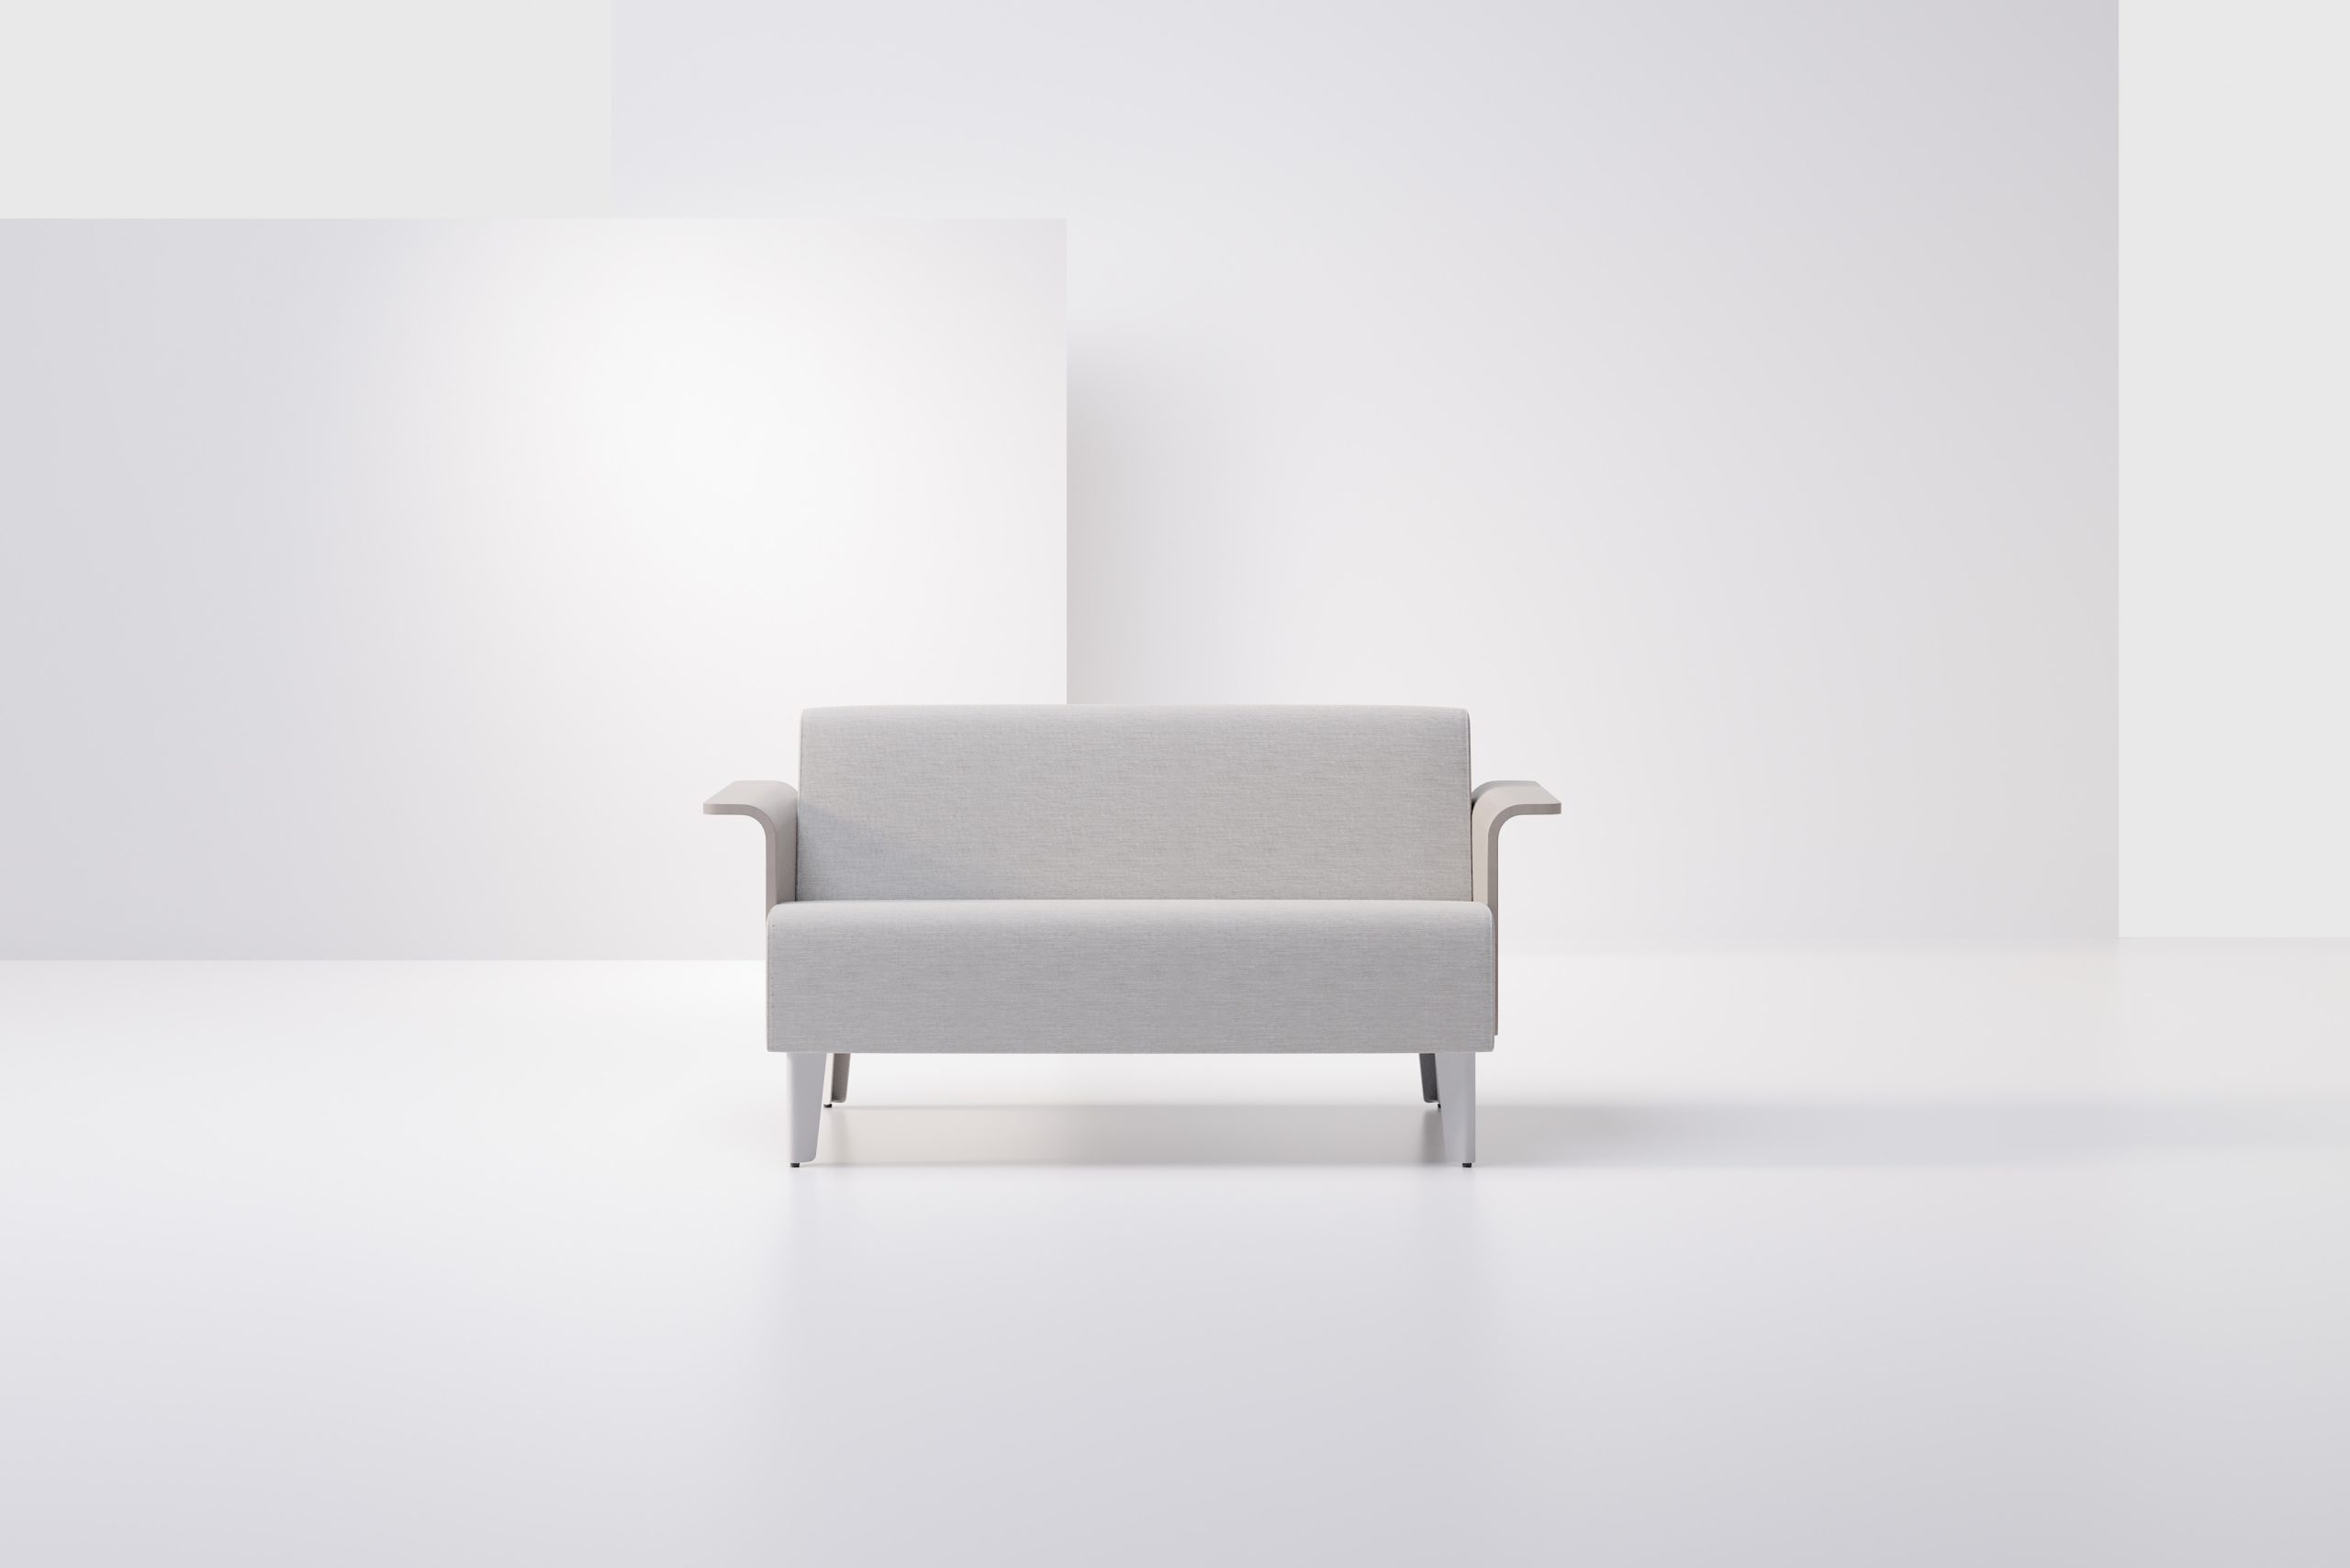 Avila Sofa with Molded Solid Surface Arms Featured Product Image